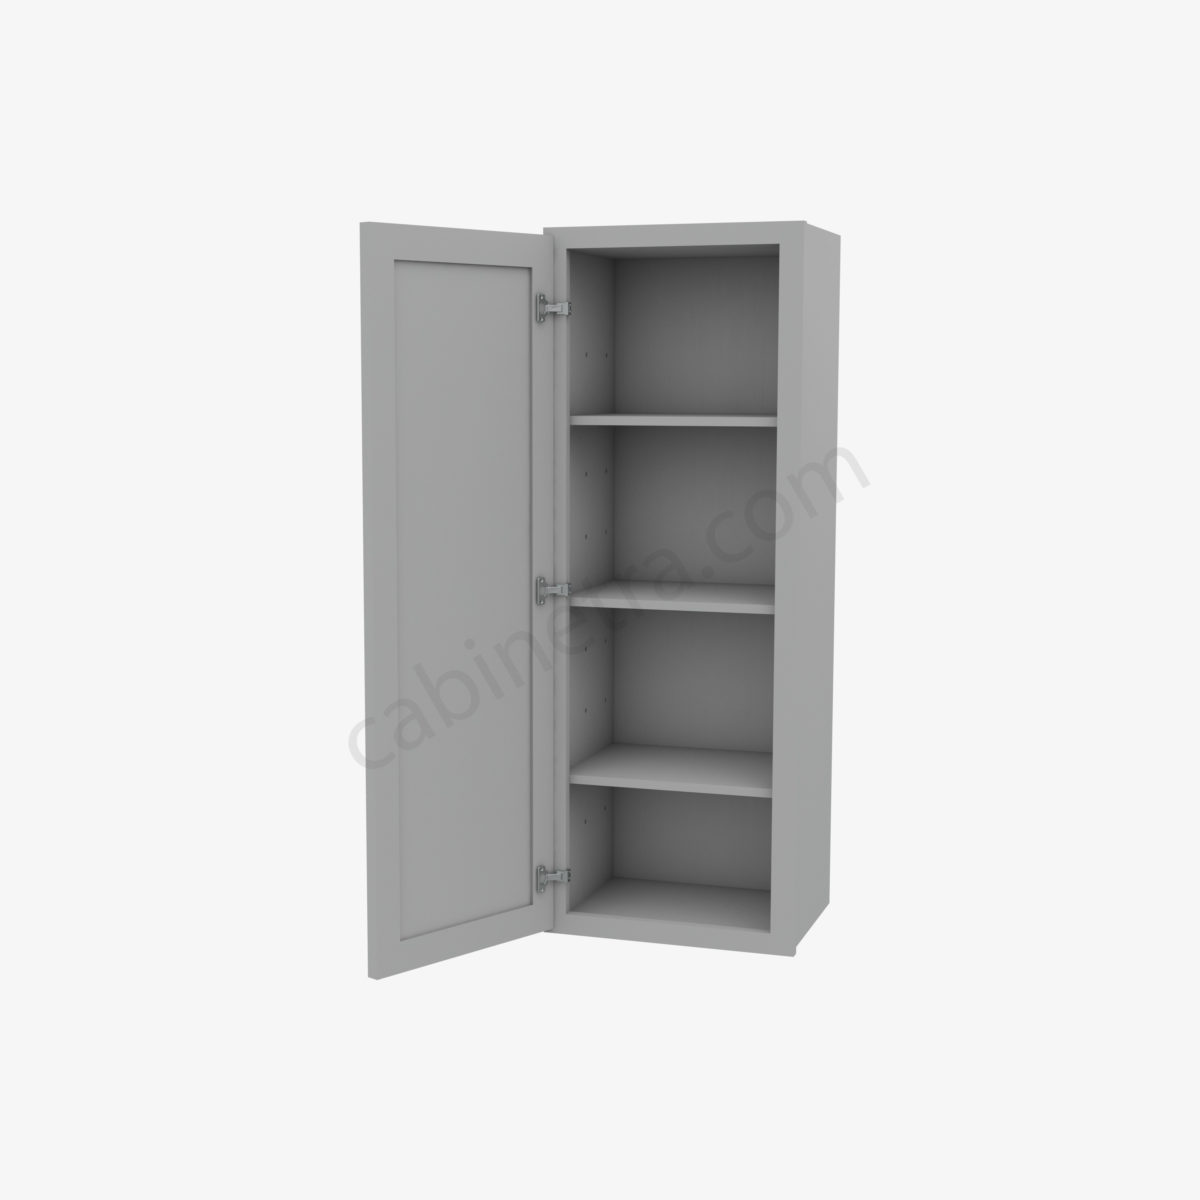 AB W1542 5 Forevermark Lait Gray Shaker Cabinetra scaled